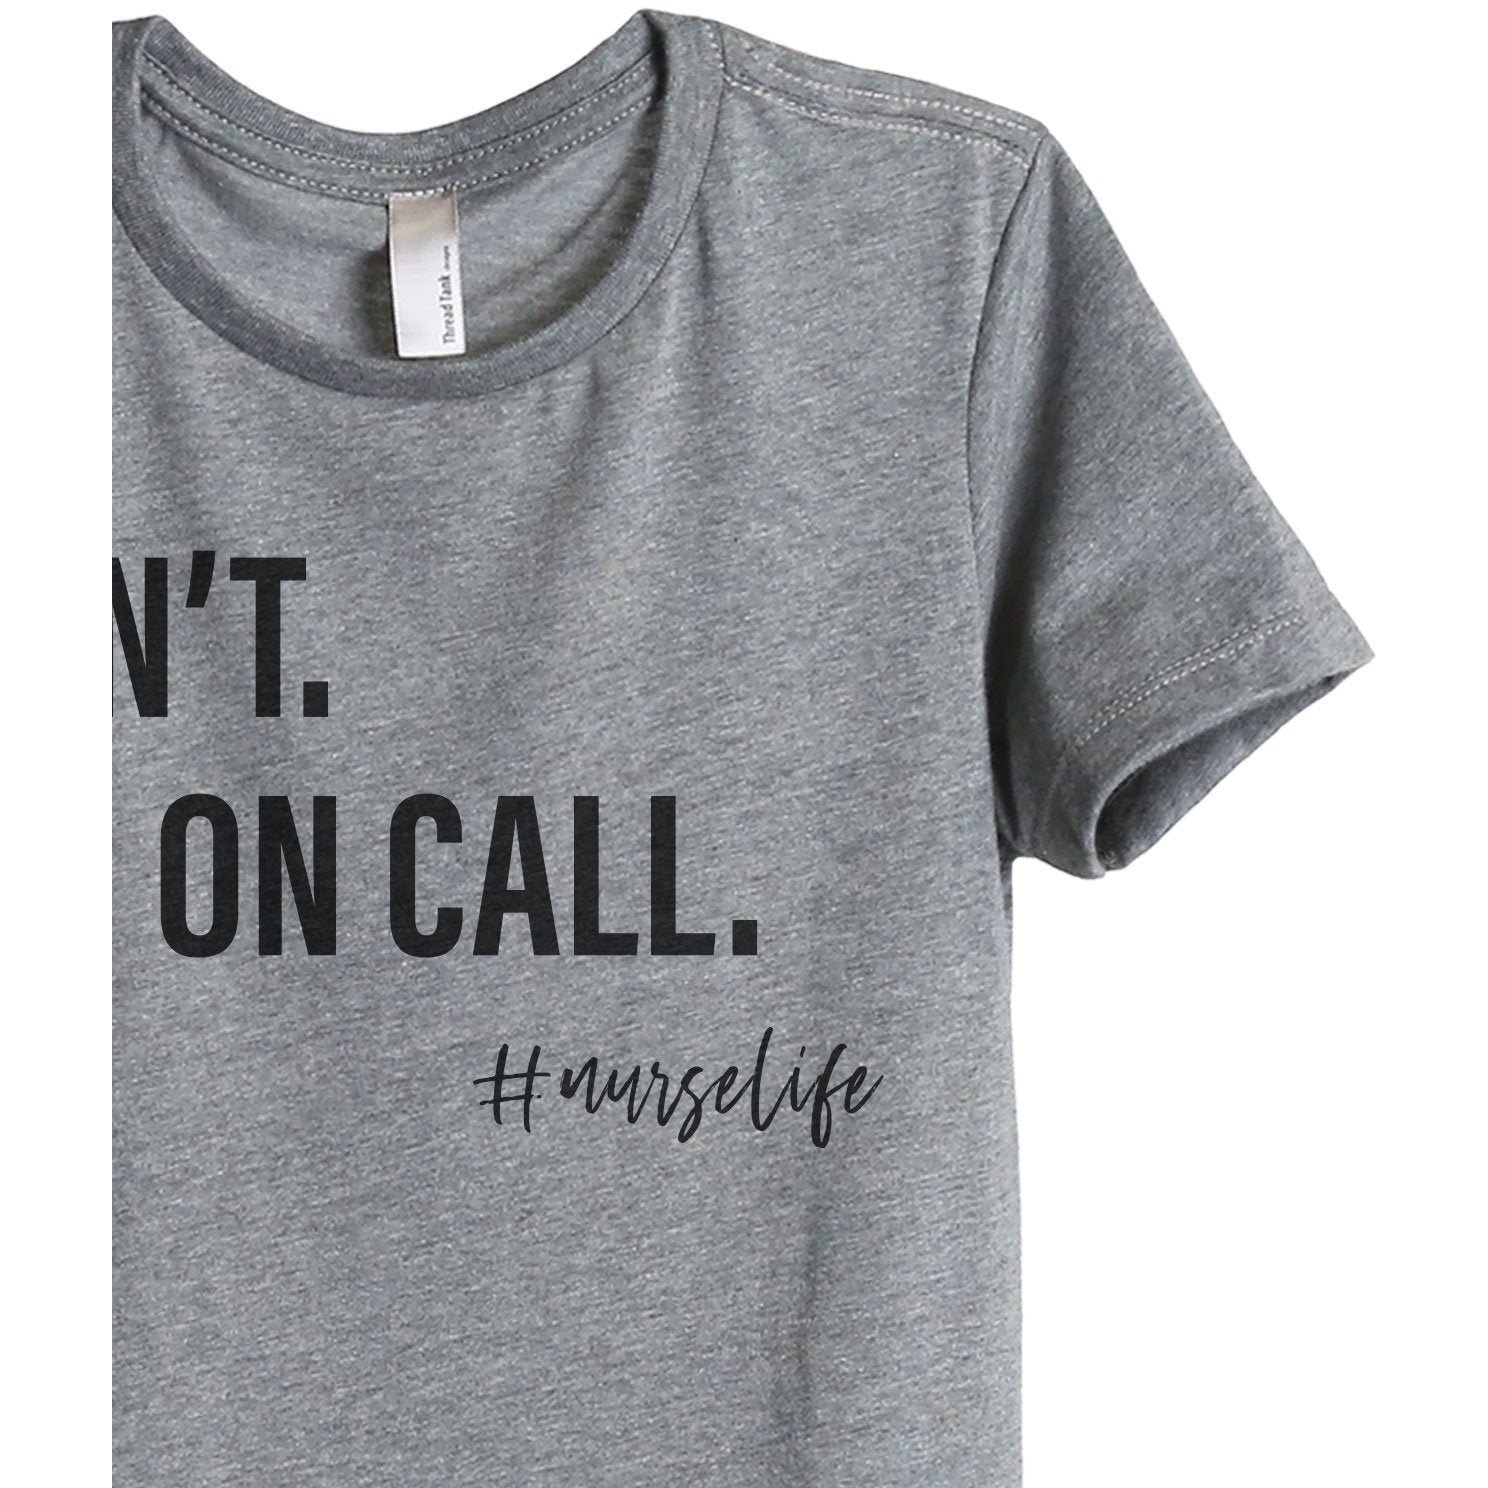 Can't I'm On Call Nurse Life Women's Relaxed Crewneck T-Shirt Top Tee Heather Grey Zoom Details
